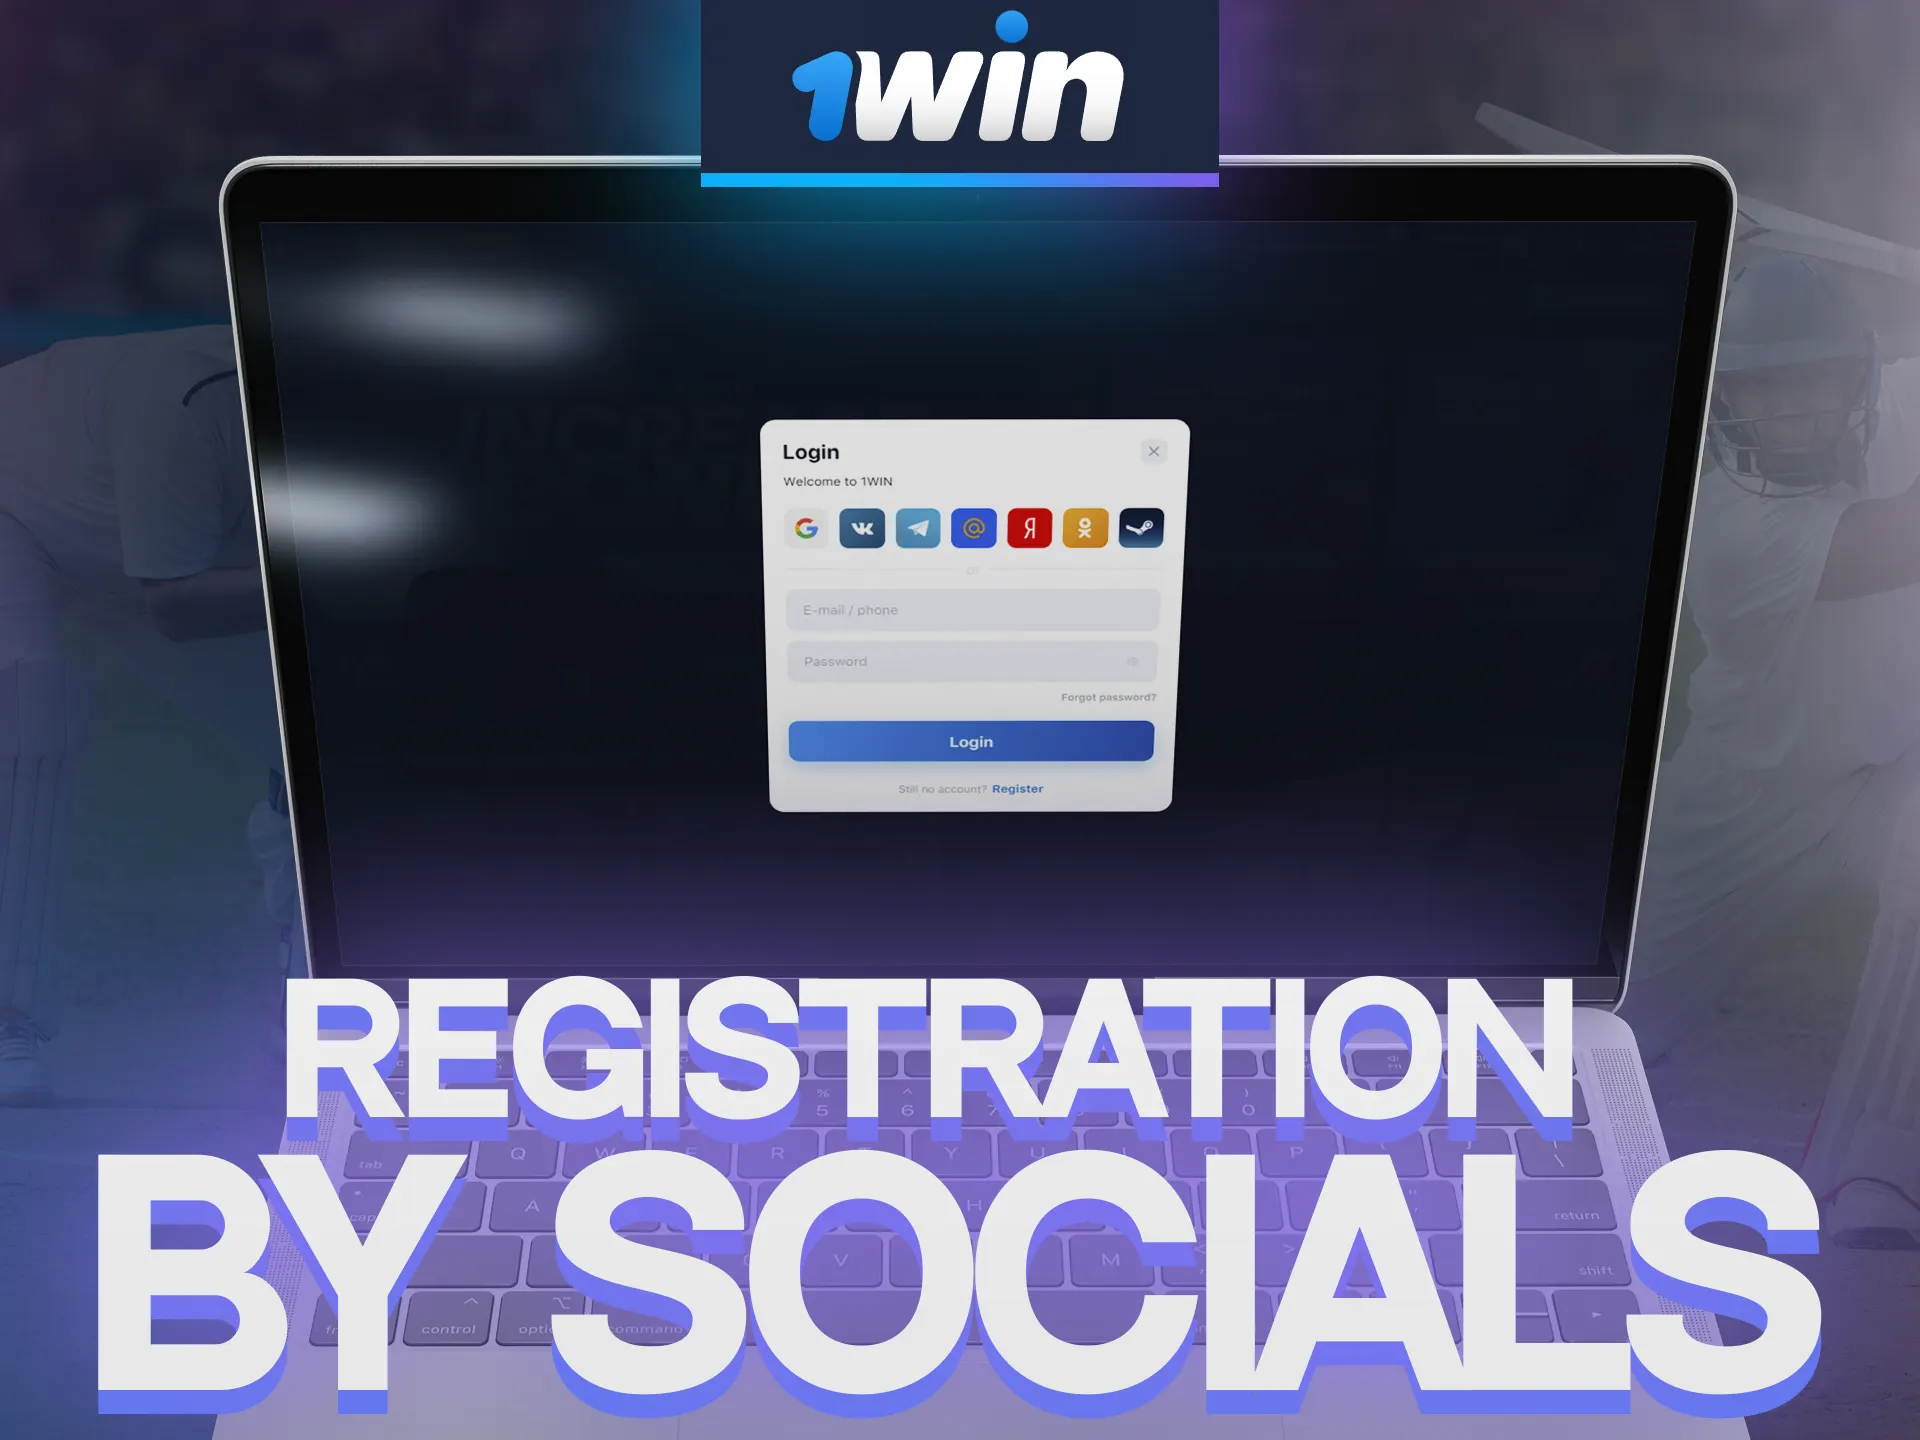 Sign up for 1Win through your social networks.